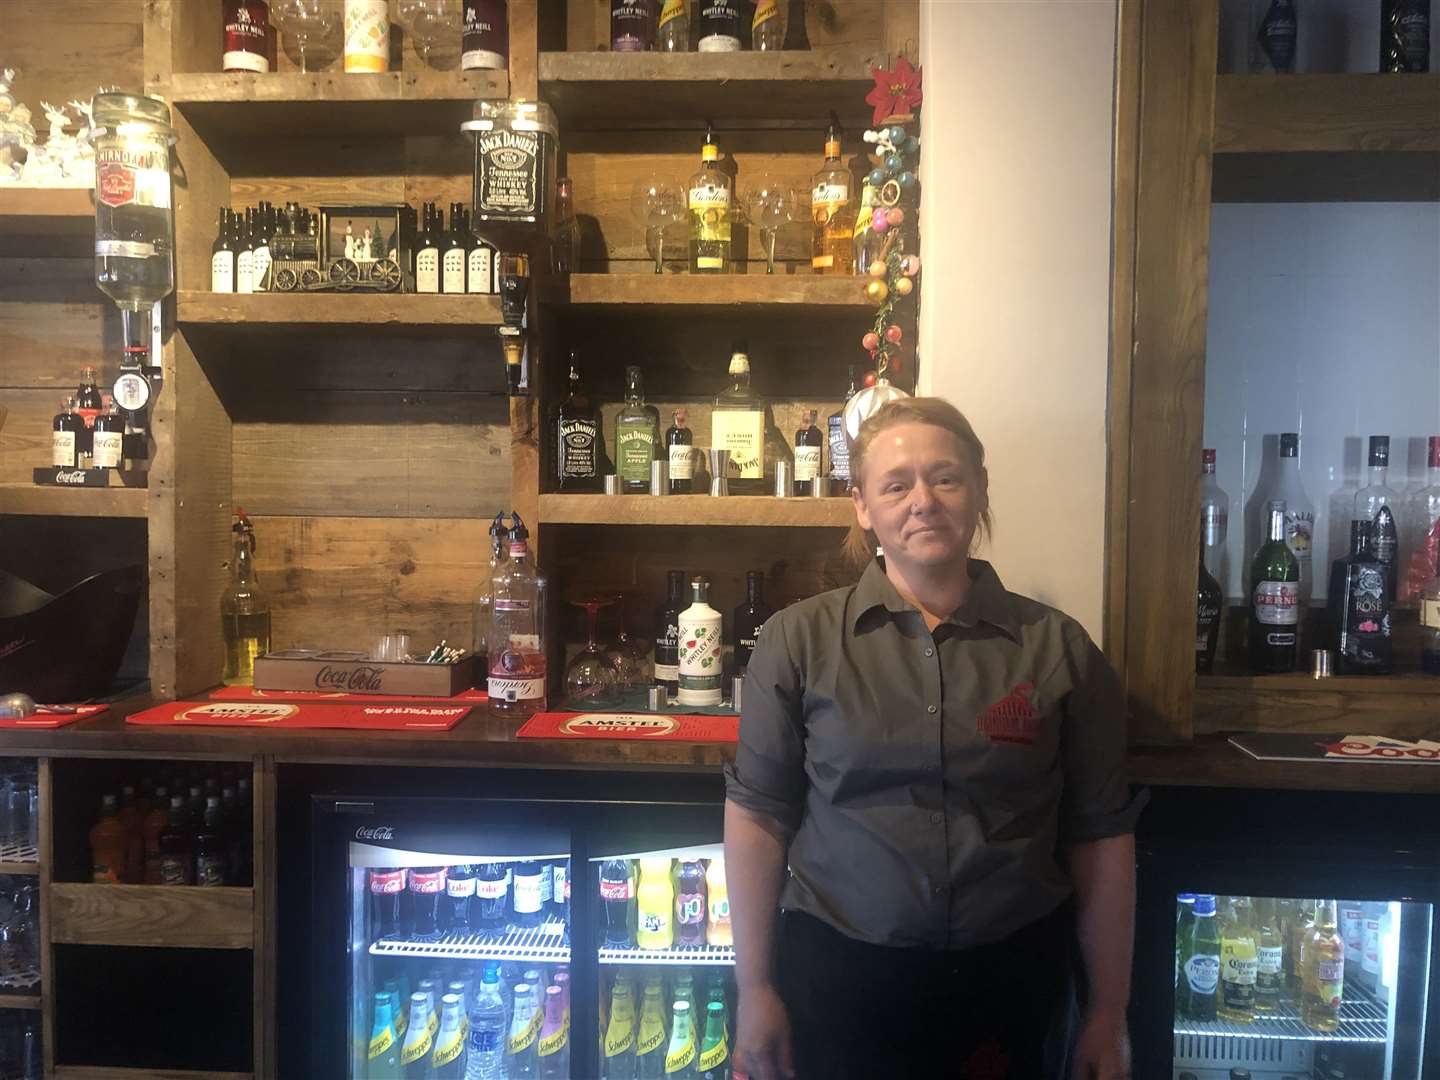 Zoe Clayden works behind the bar at the pub